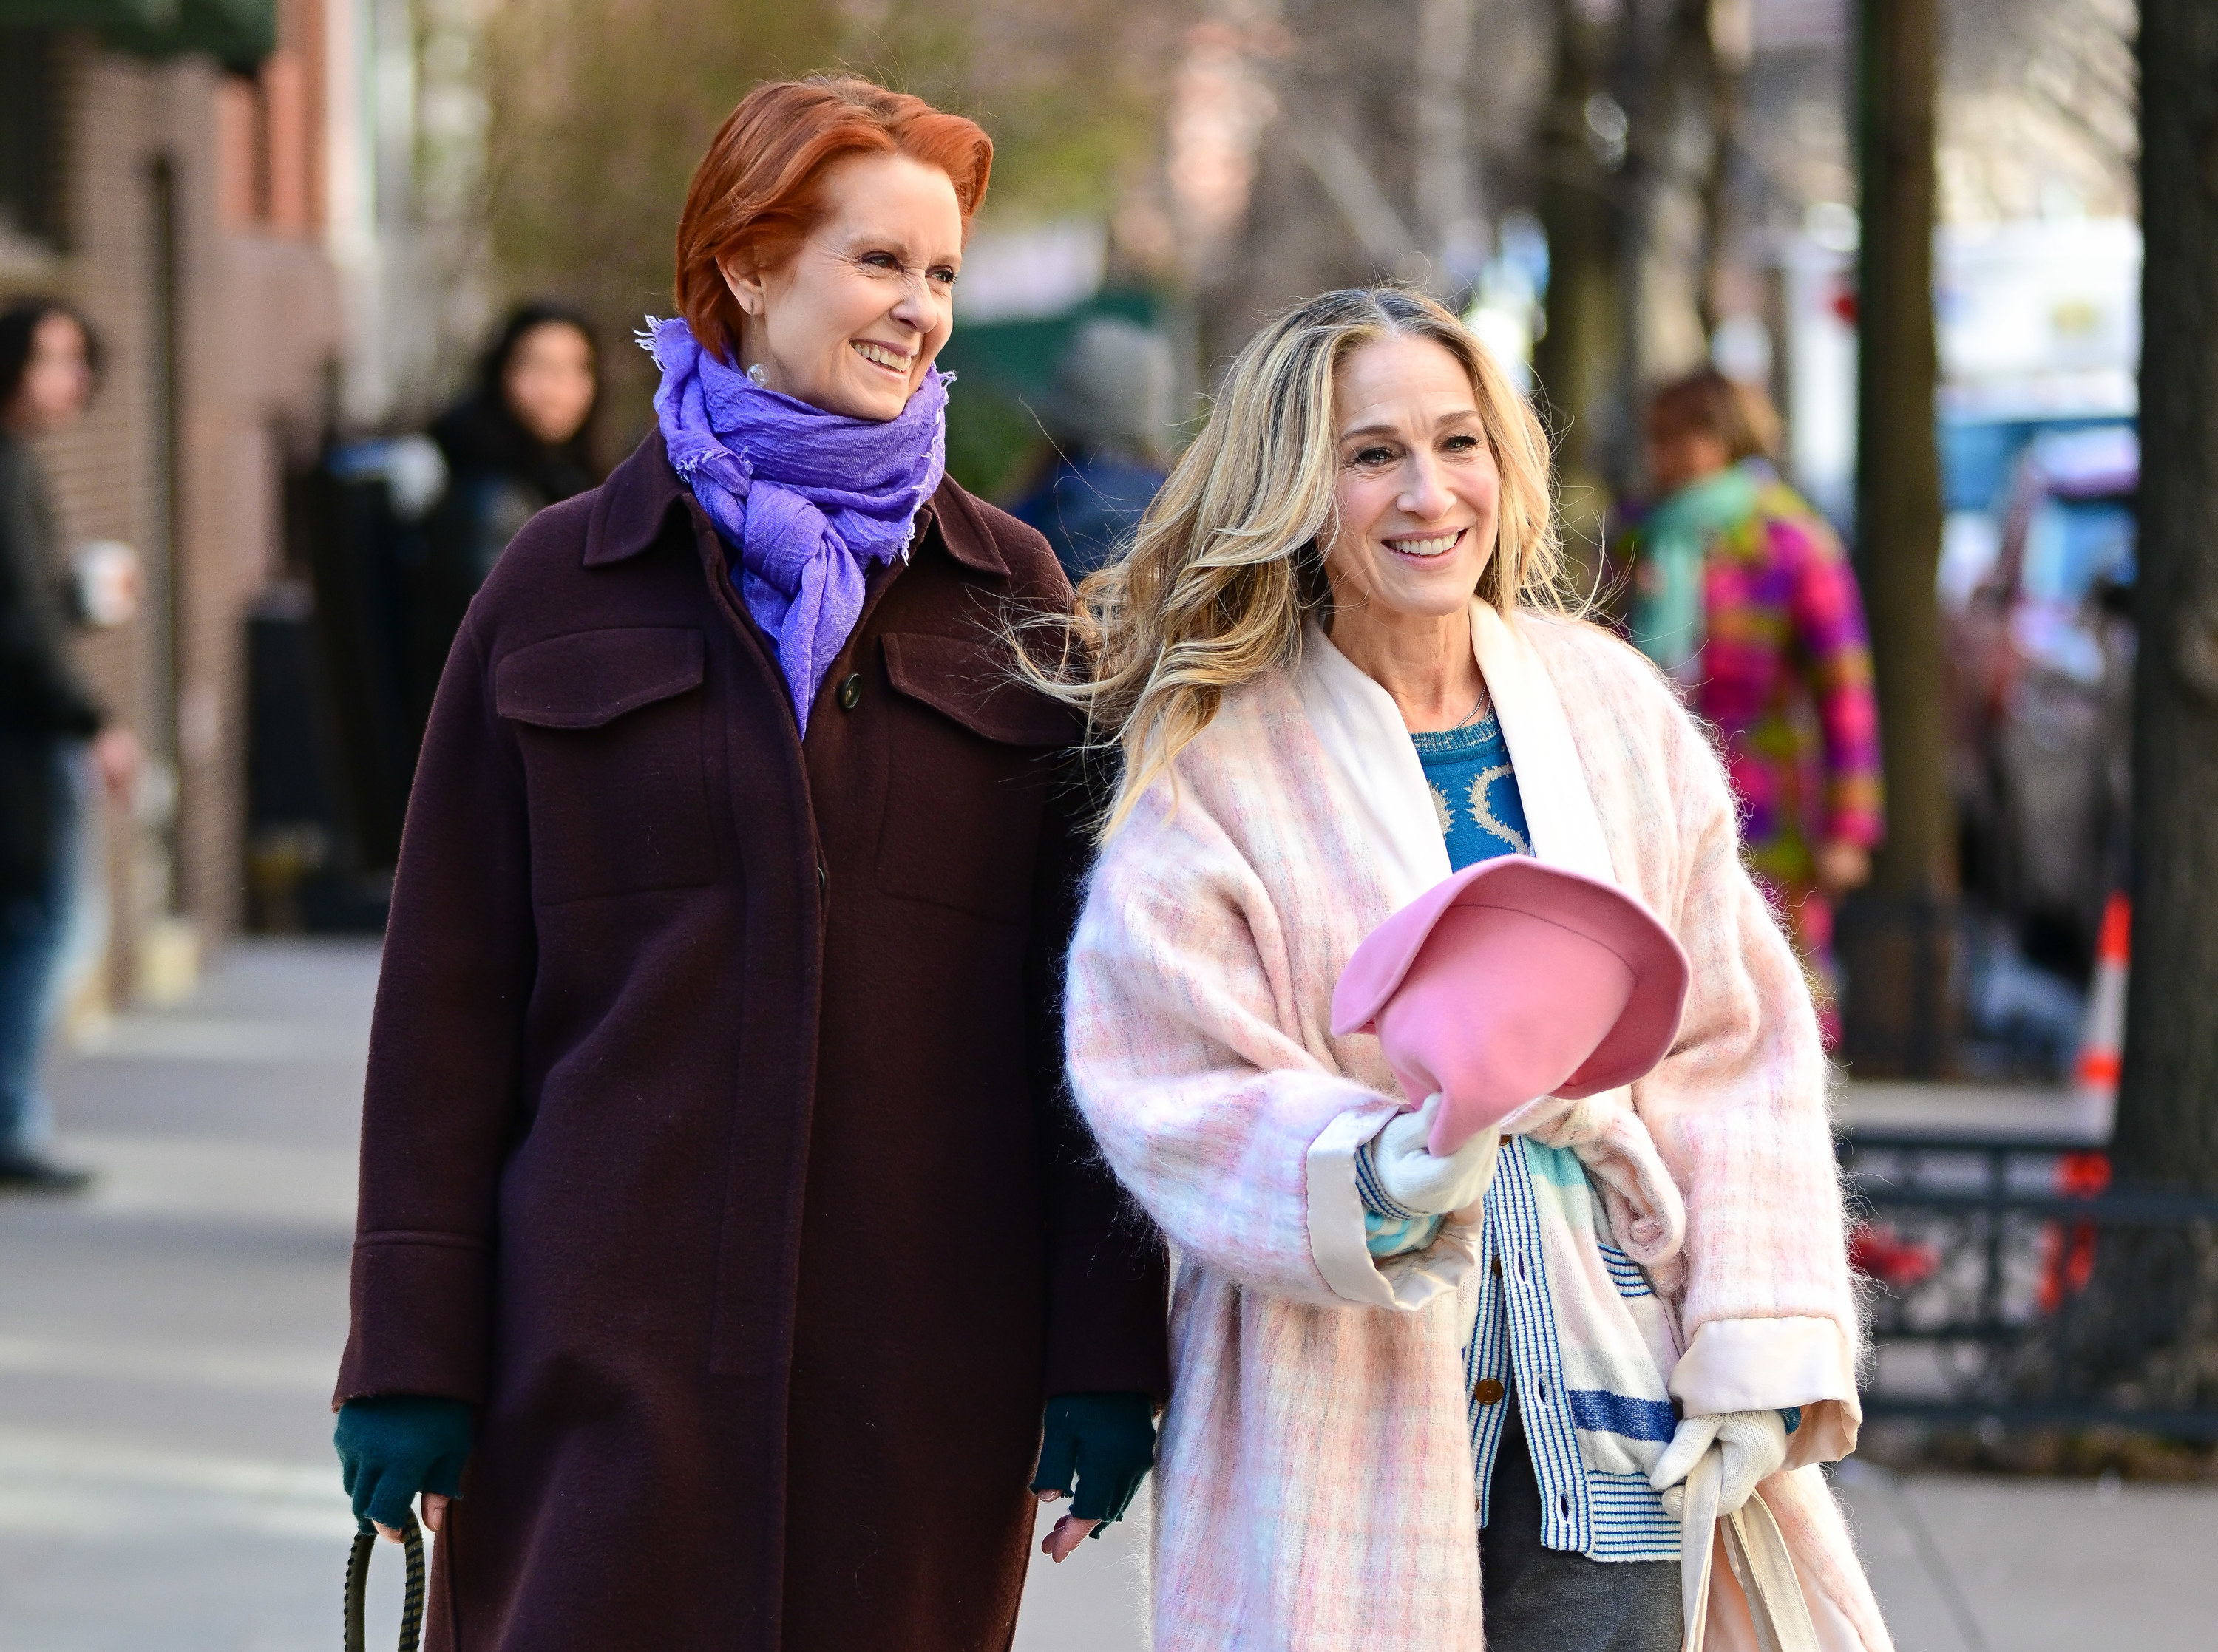 Miranda and Carrie wearing coats and walking on the street